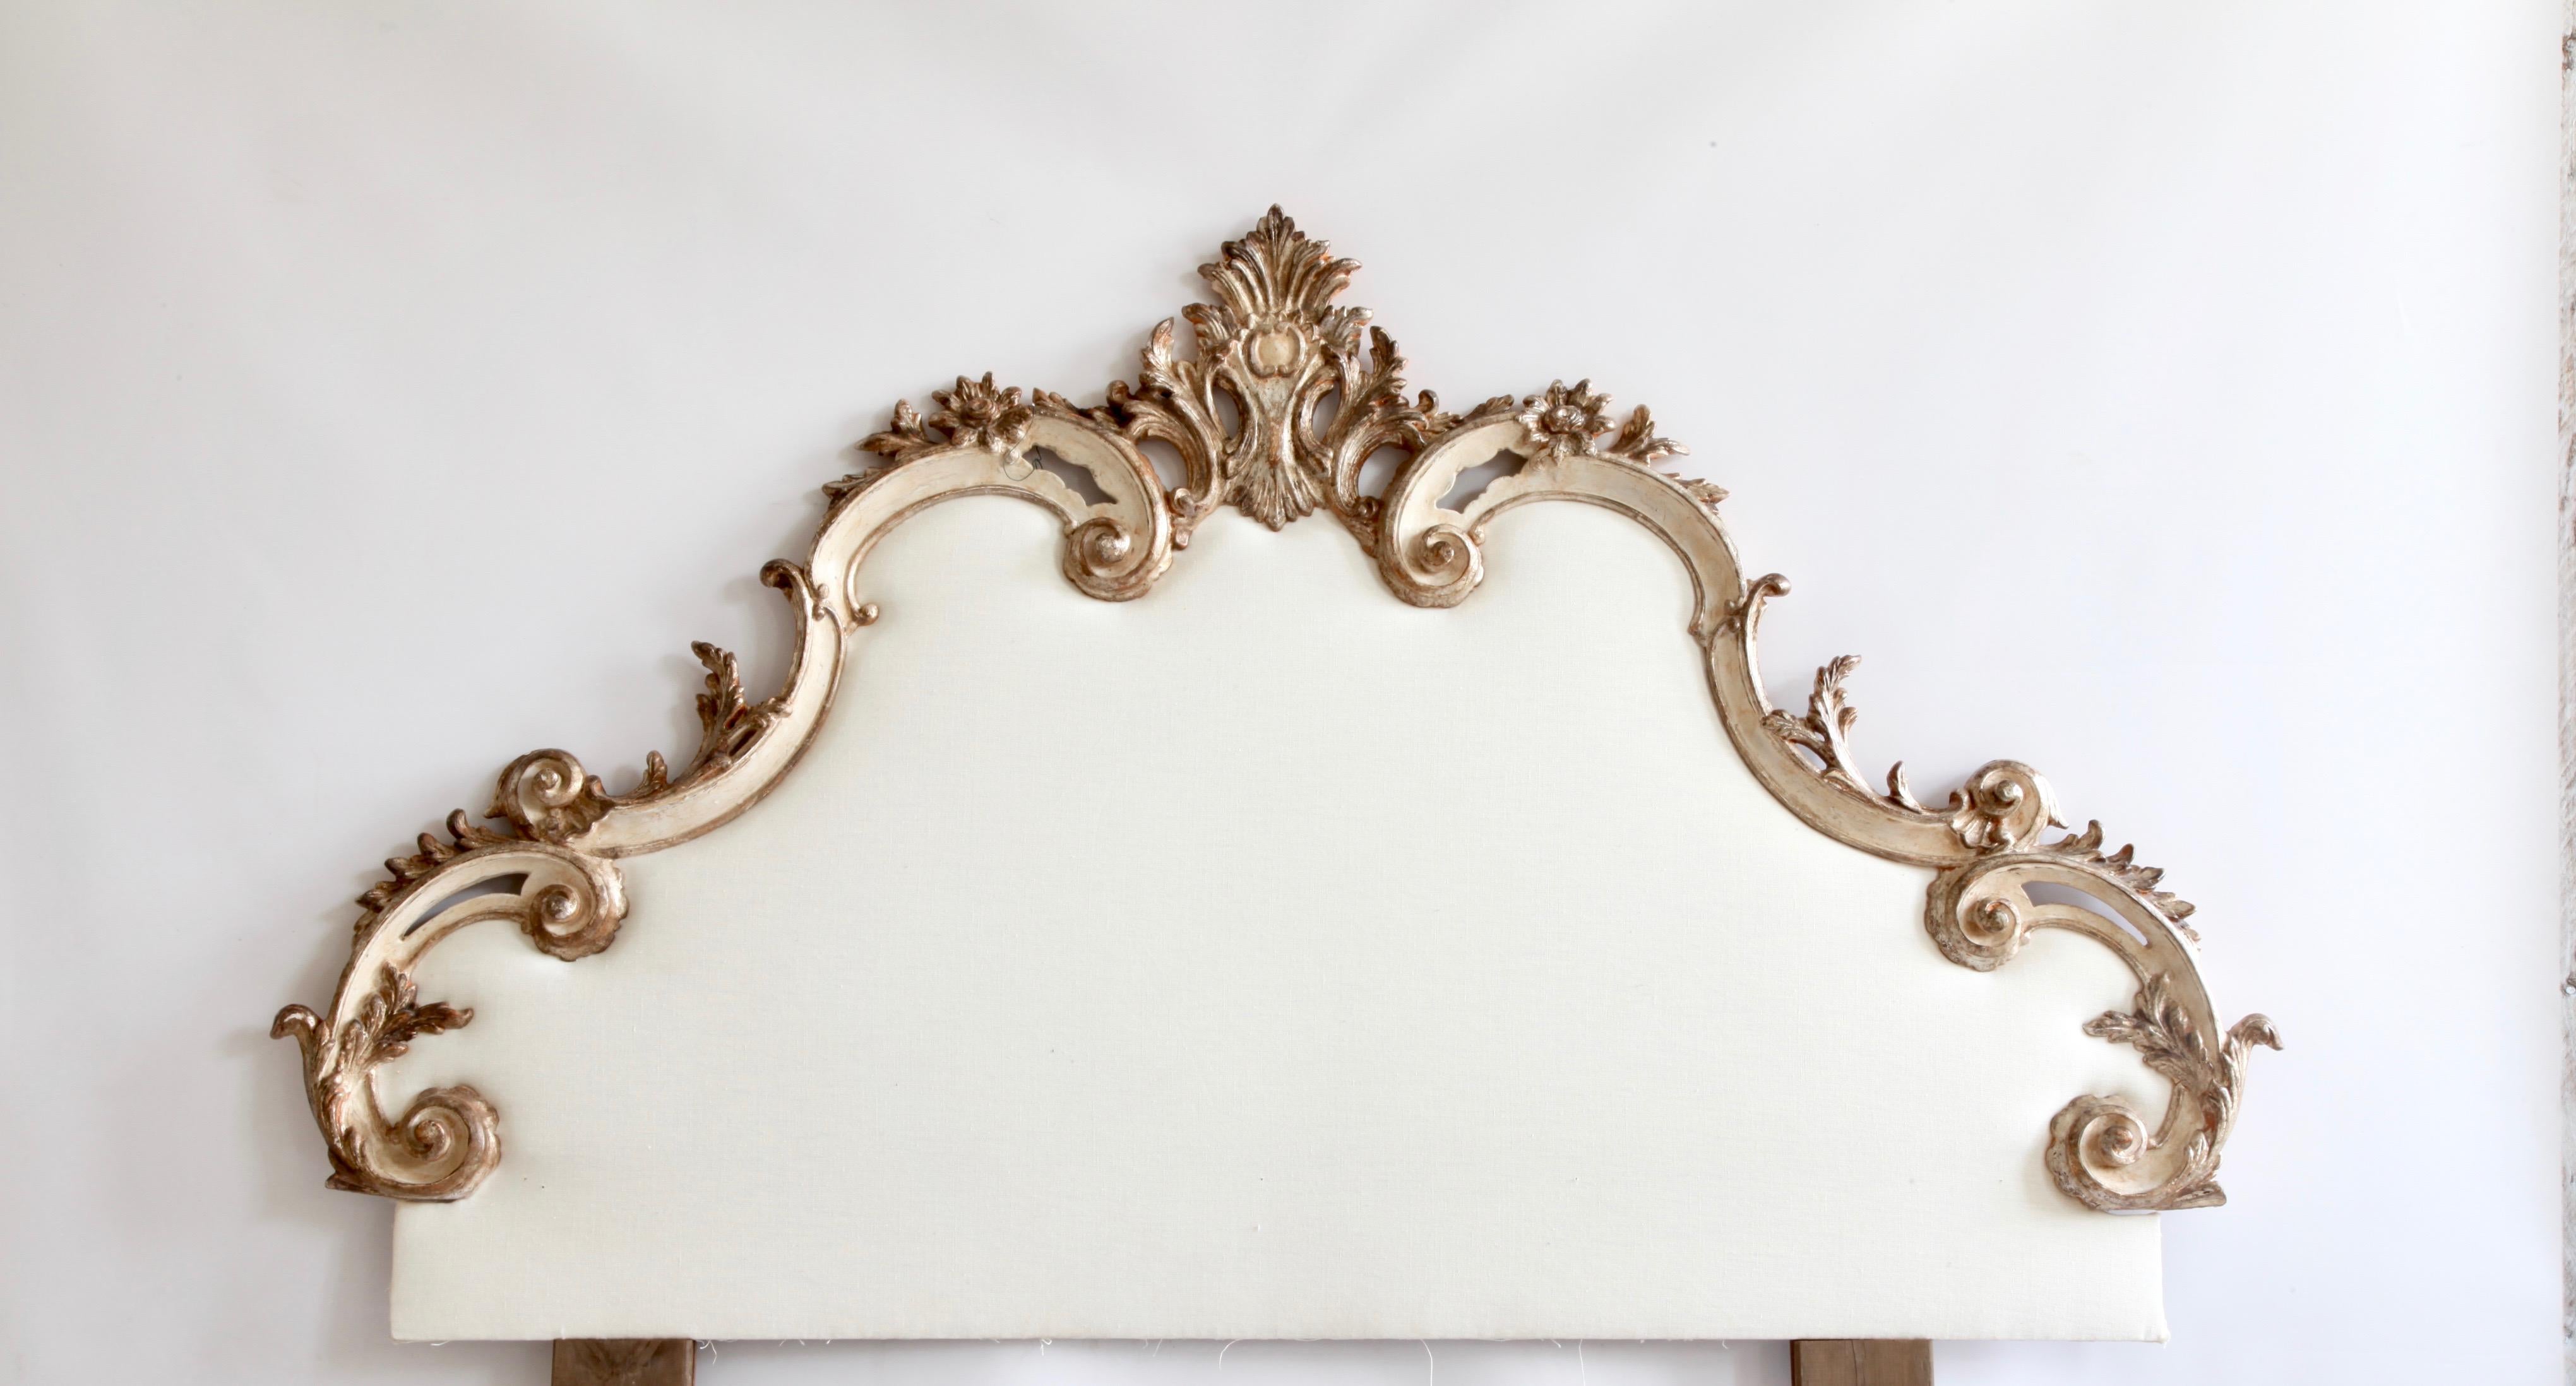 Baroque Early 20th Century Venetian Headboard in Antique White with Silver Highlights